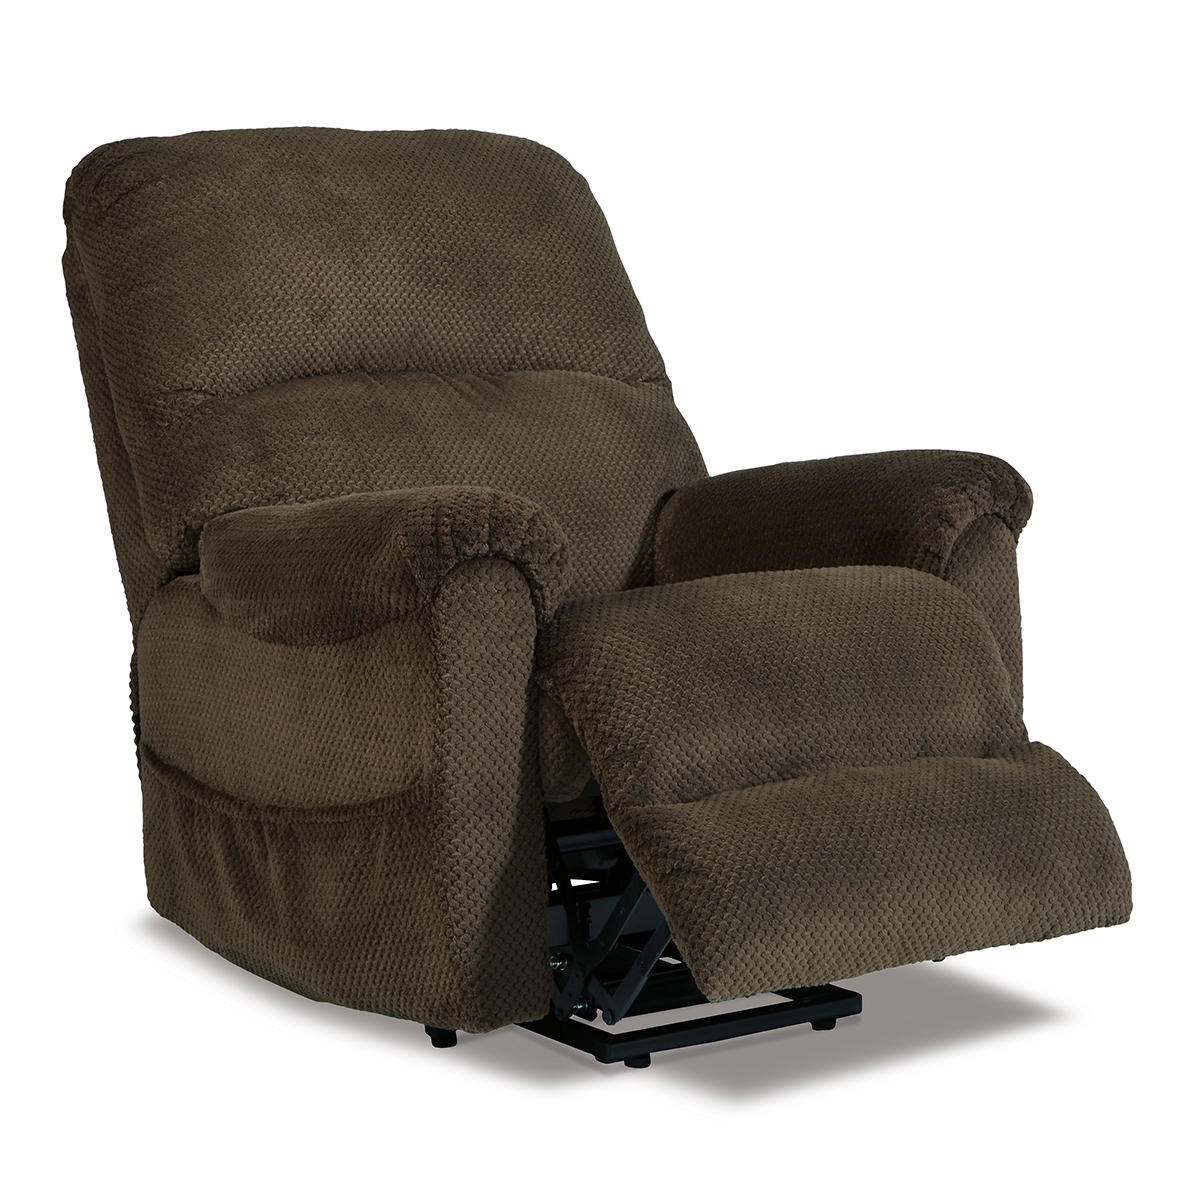 Picture of BOXER CHOC PWR LIFT RECLINER